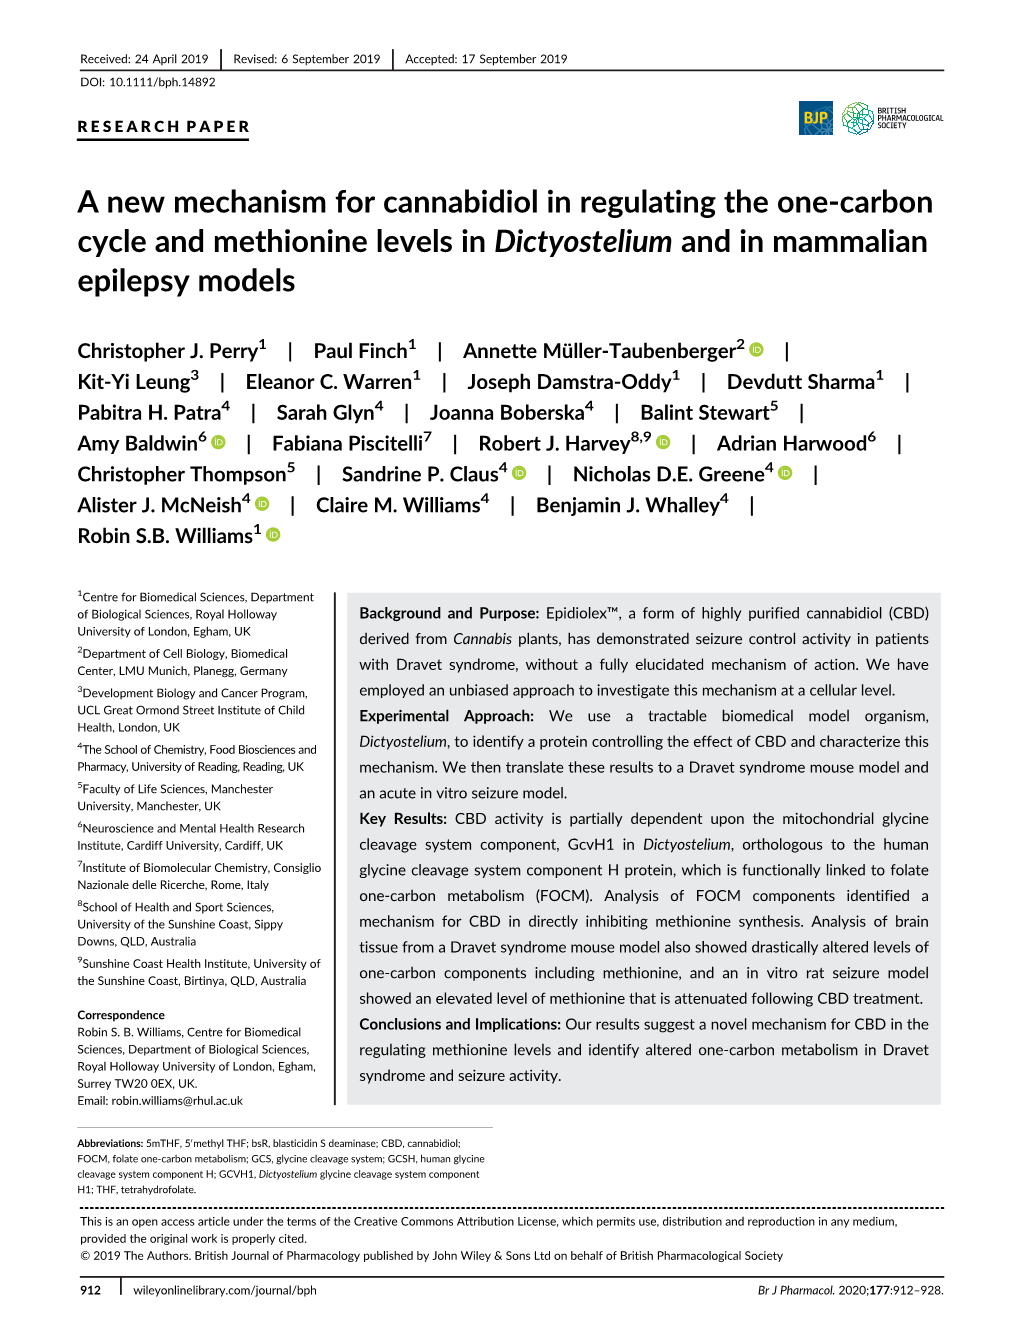 A New Mechanism for Cannabidiol in Regulating the One-Carbon Cycle and Methionine Levels in Dictyostelium and in Mammalian Epilepsy Models